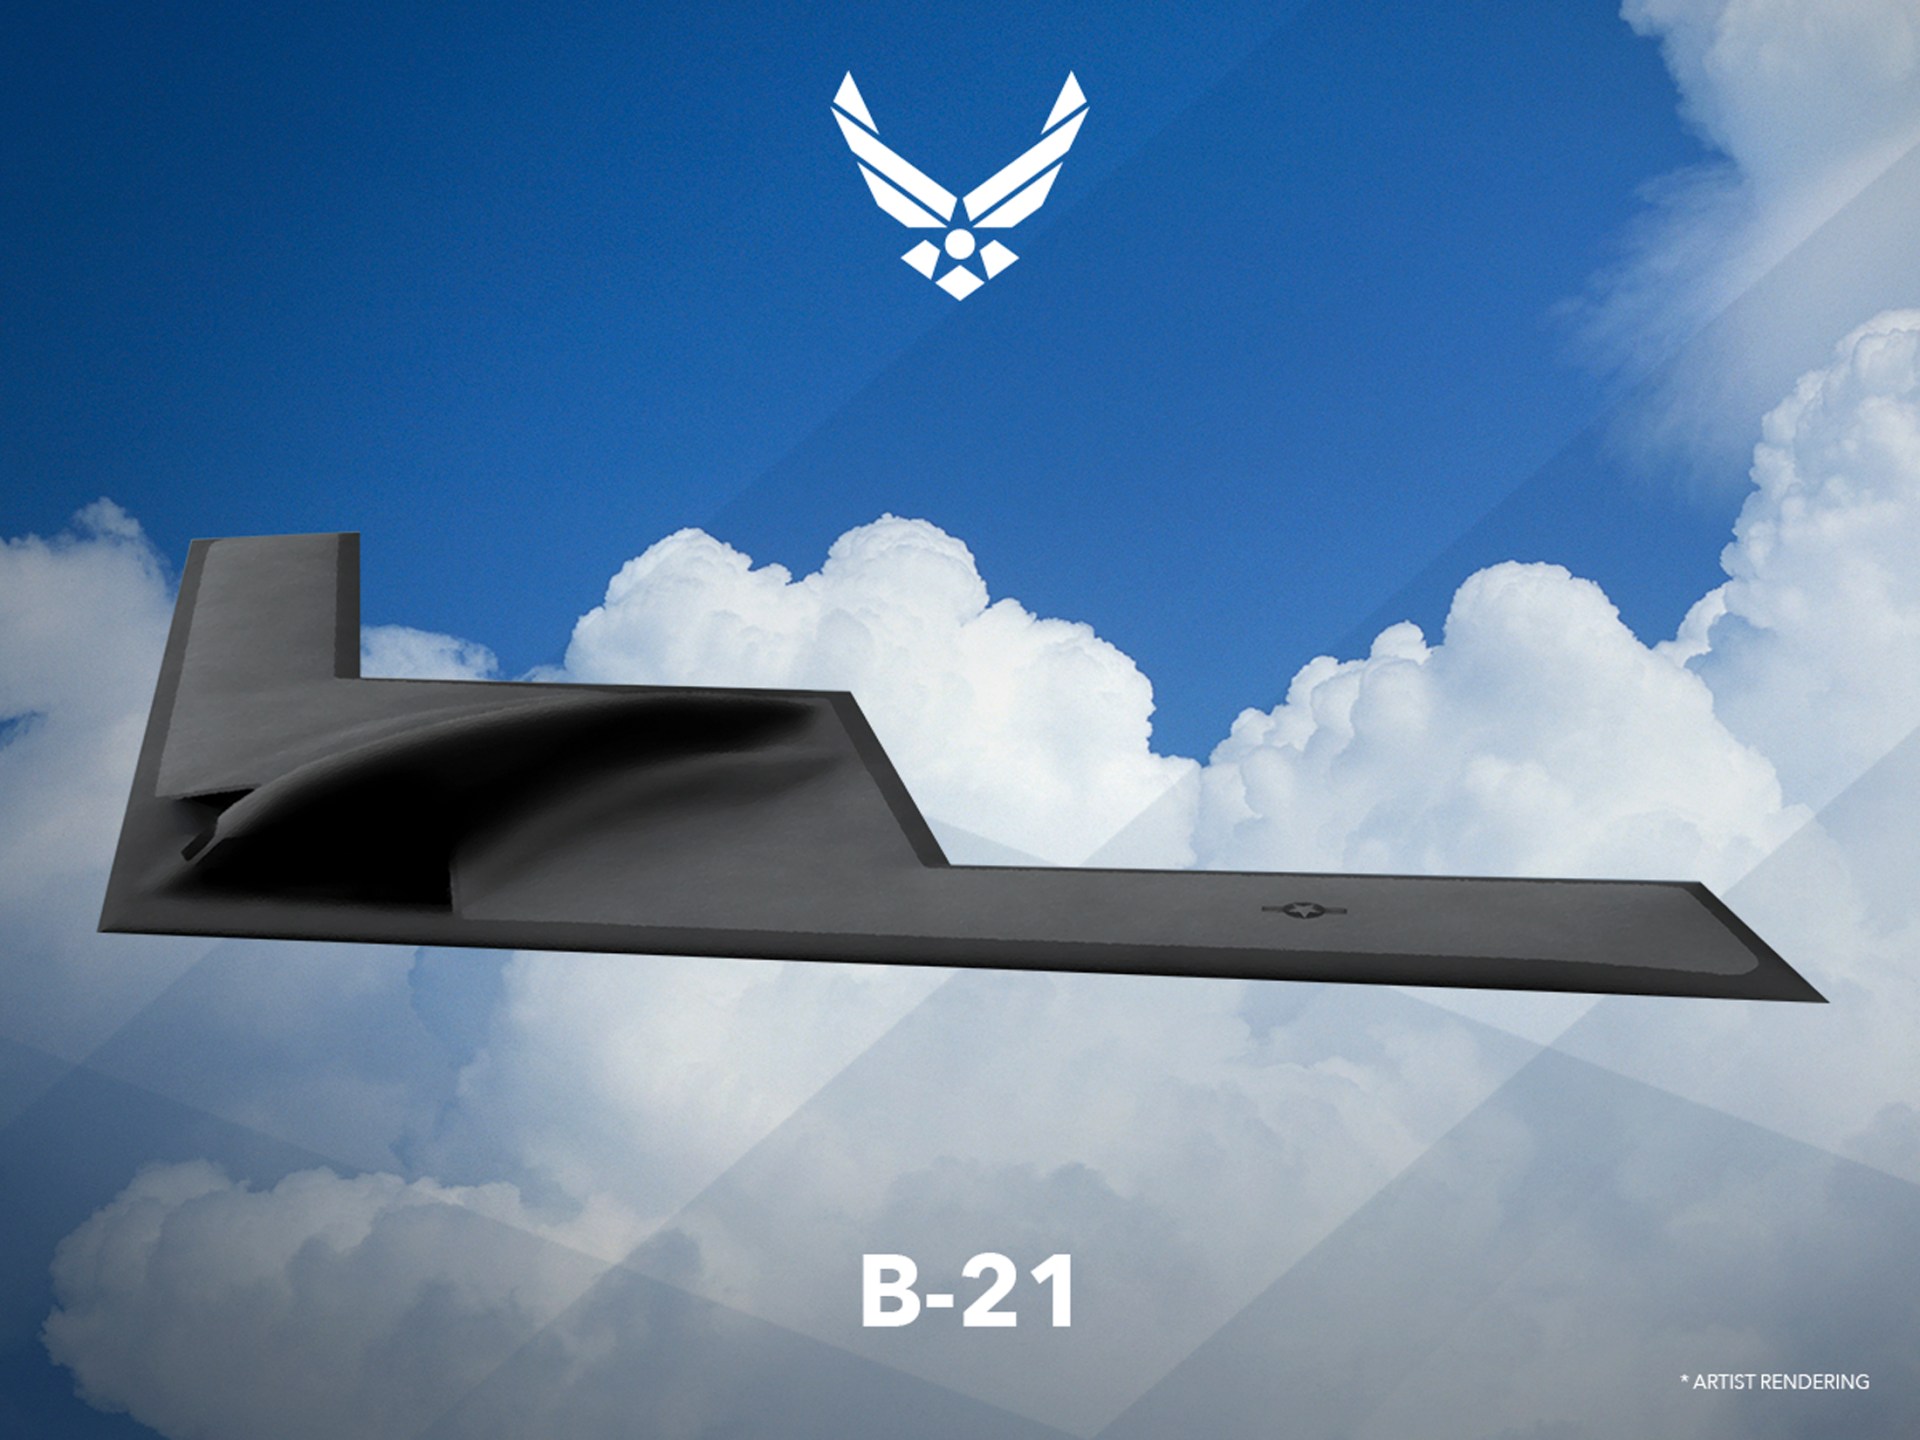 What we all know concerning the new US B-21 Raider Stealth bomber